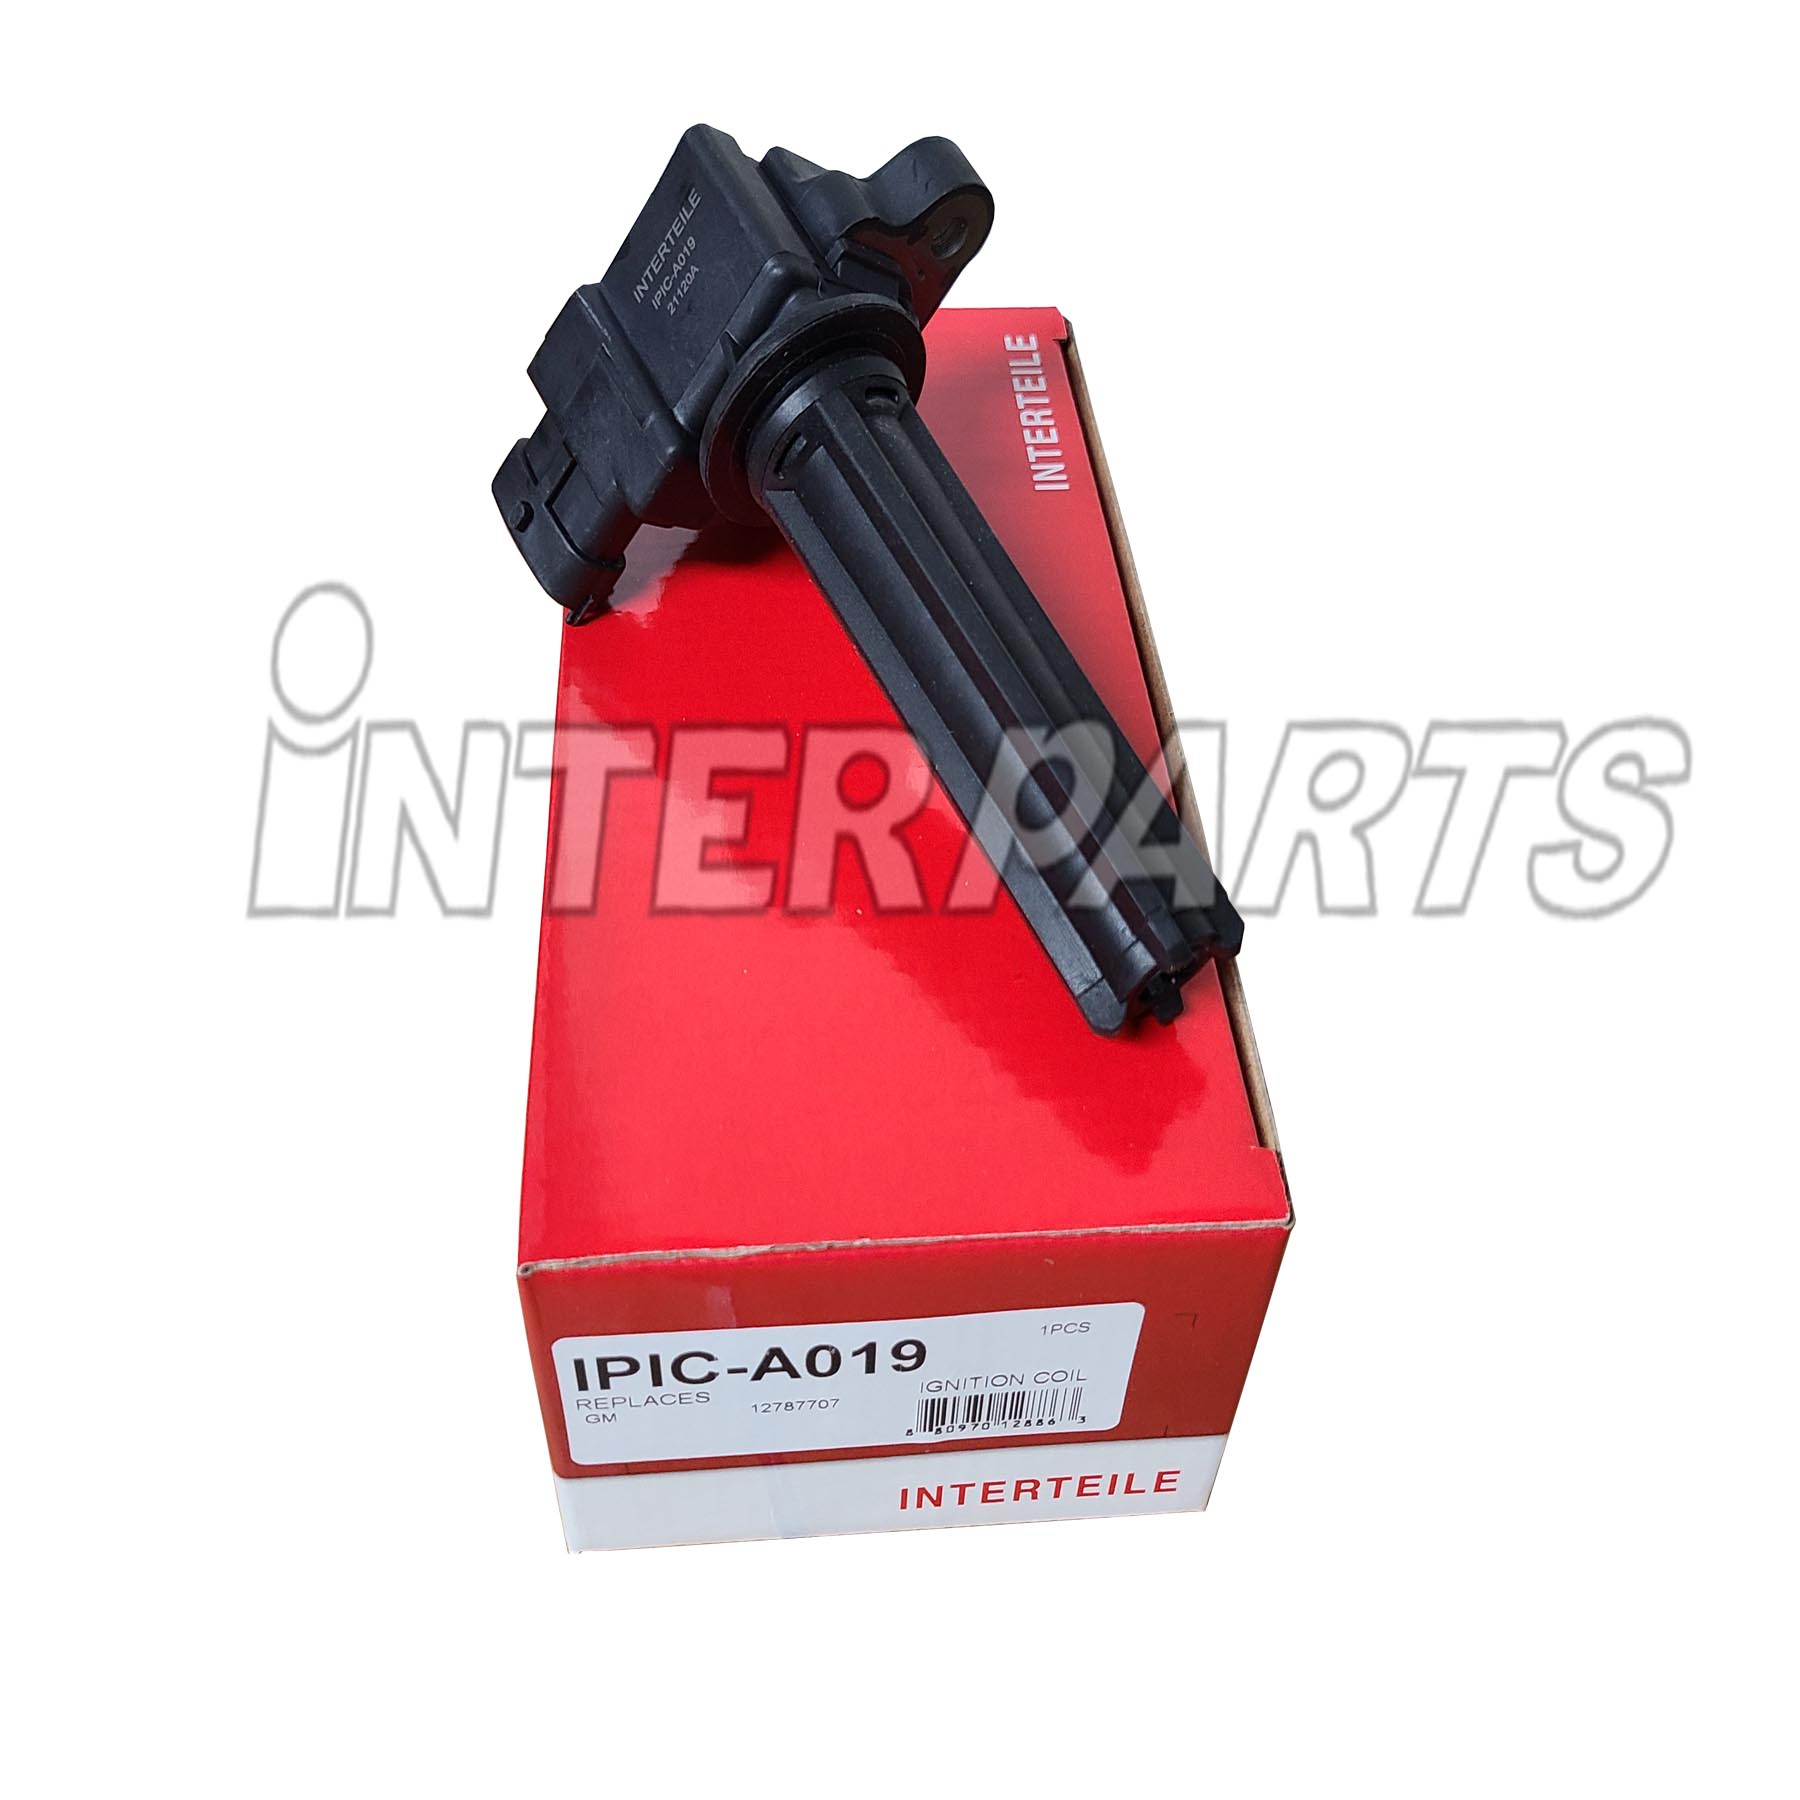 GM 호환 IGNITION COIL 12787707 IPIC-A019